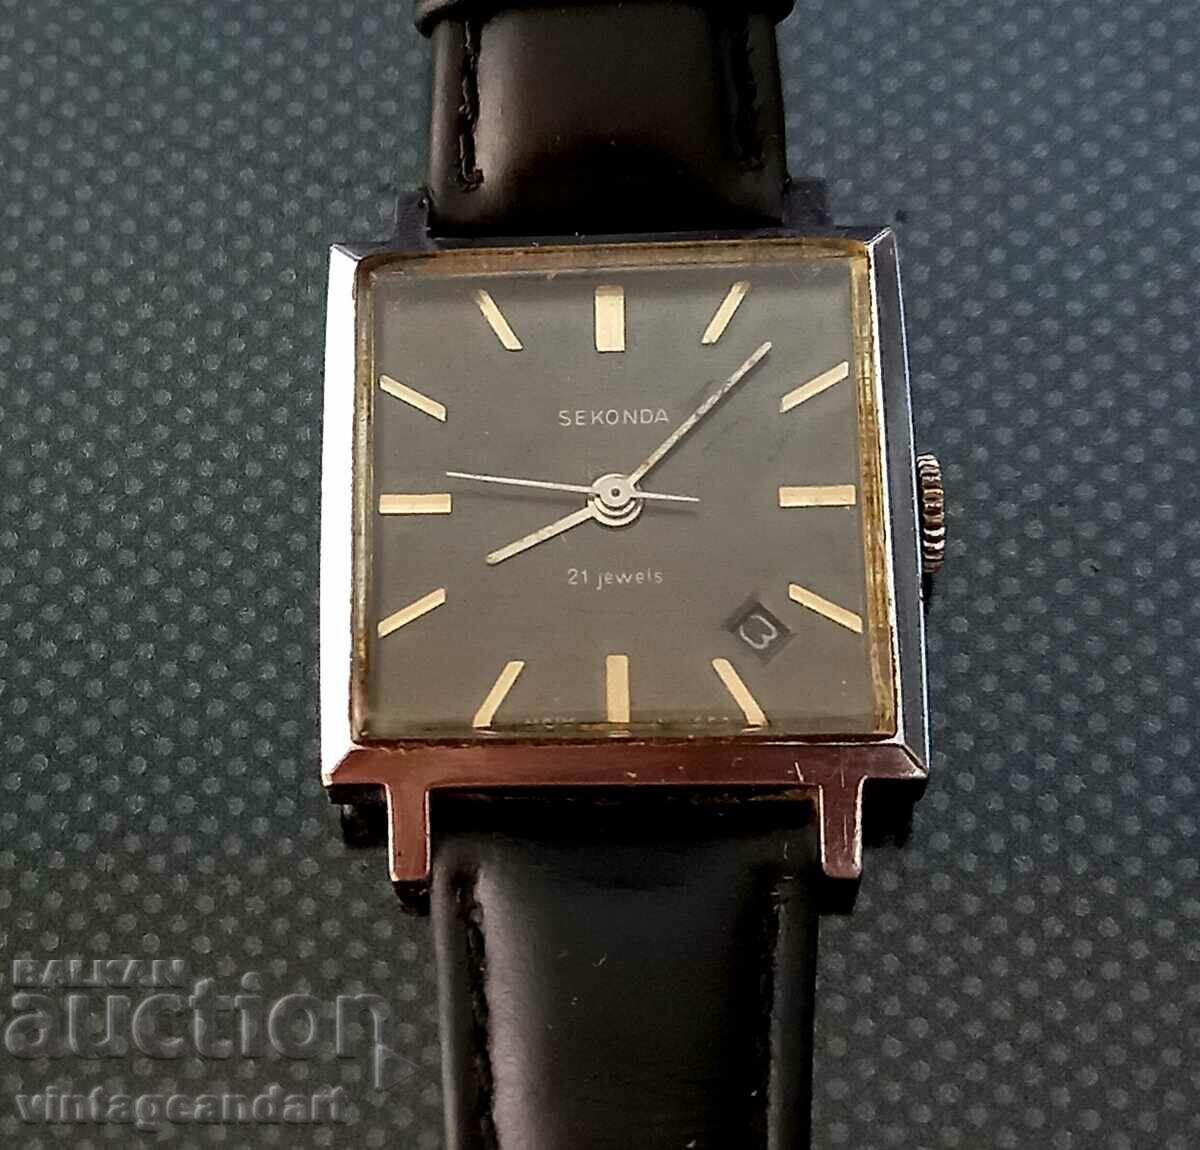 Collector's watch, Second, Glory, works great